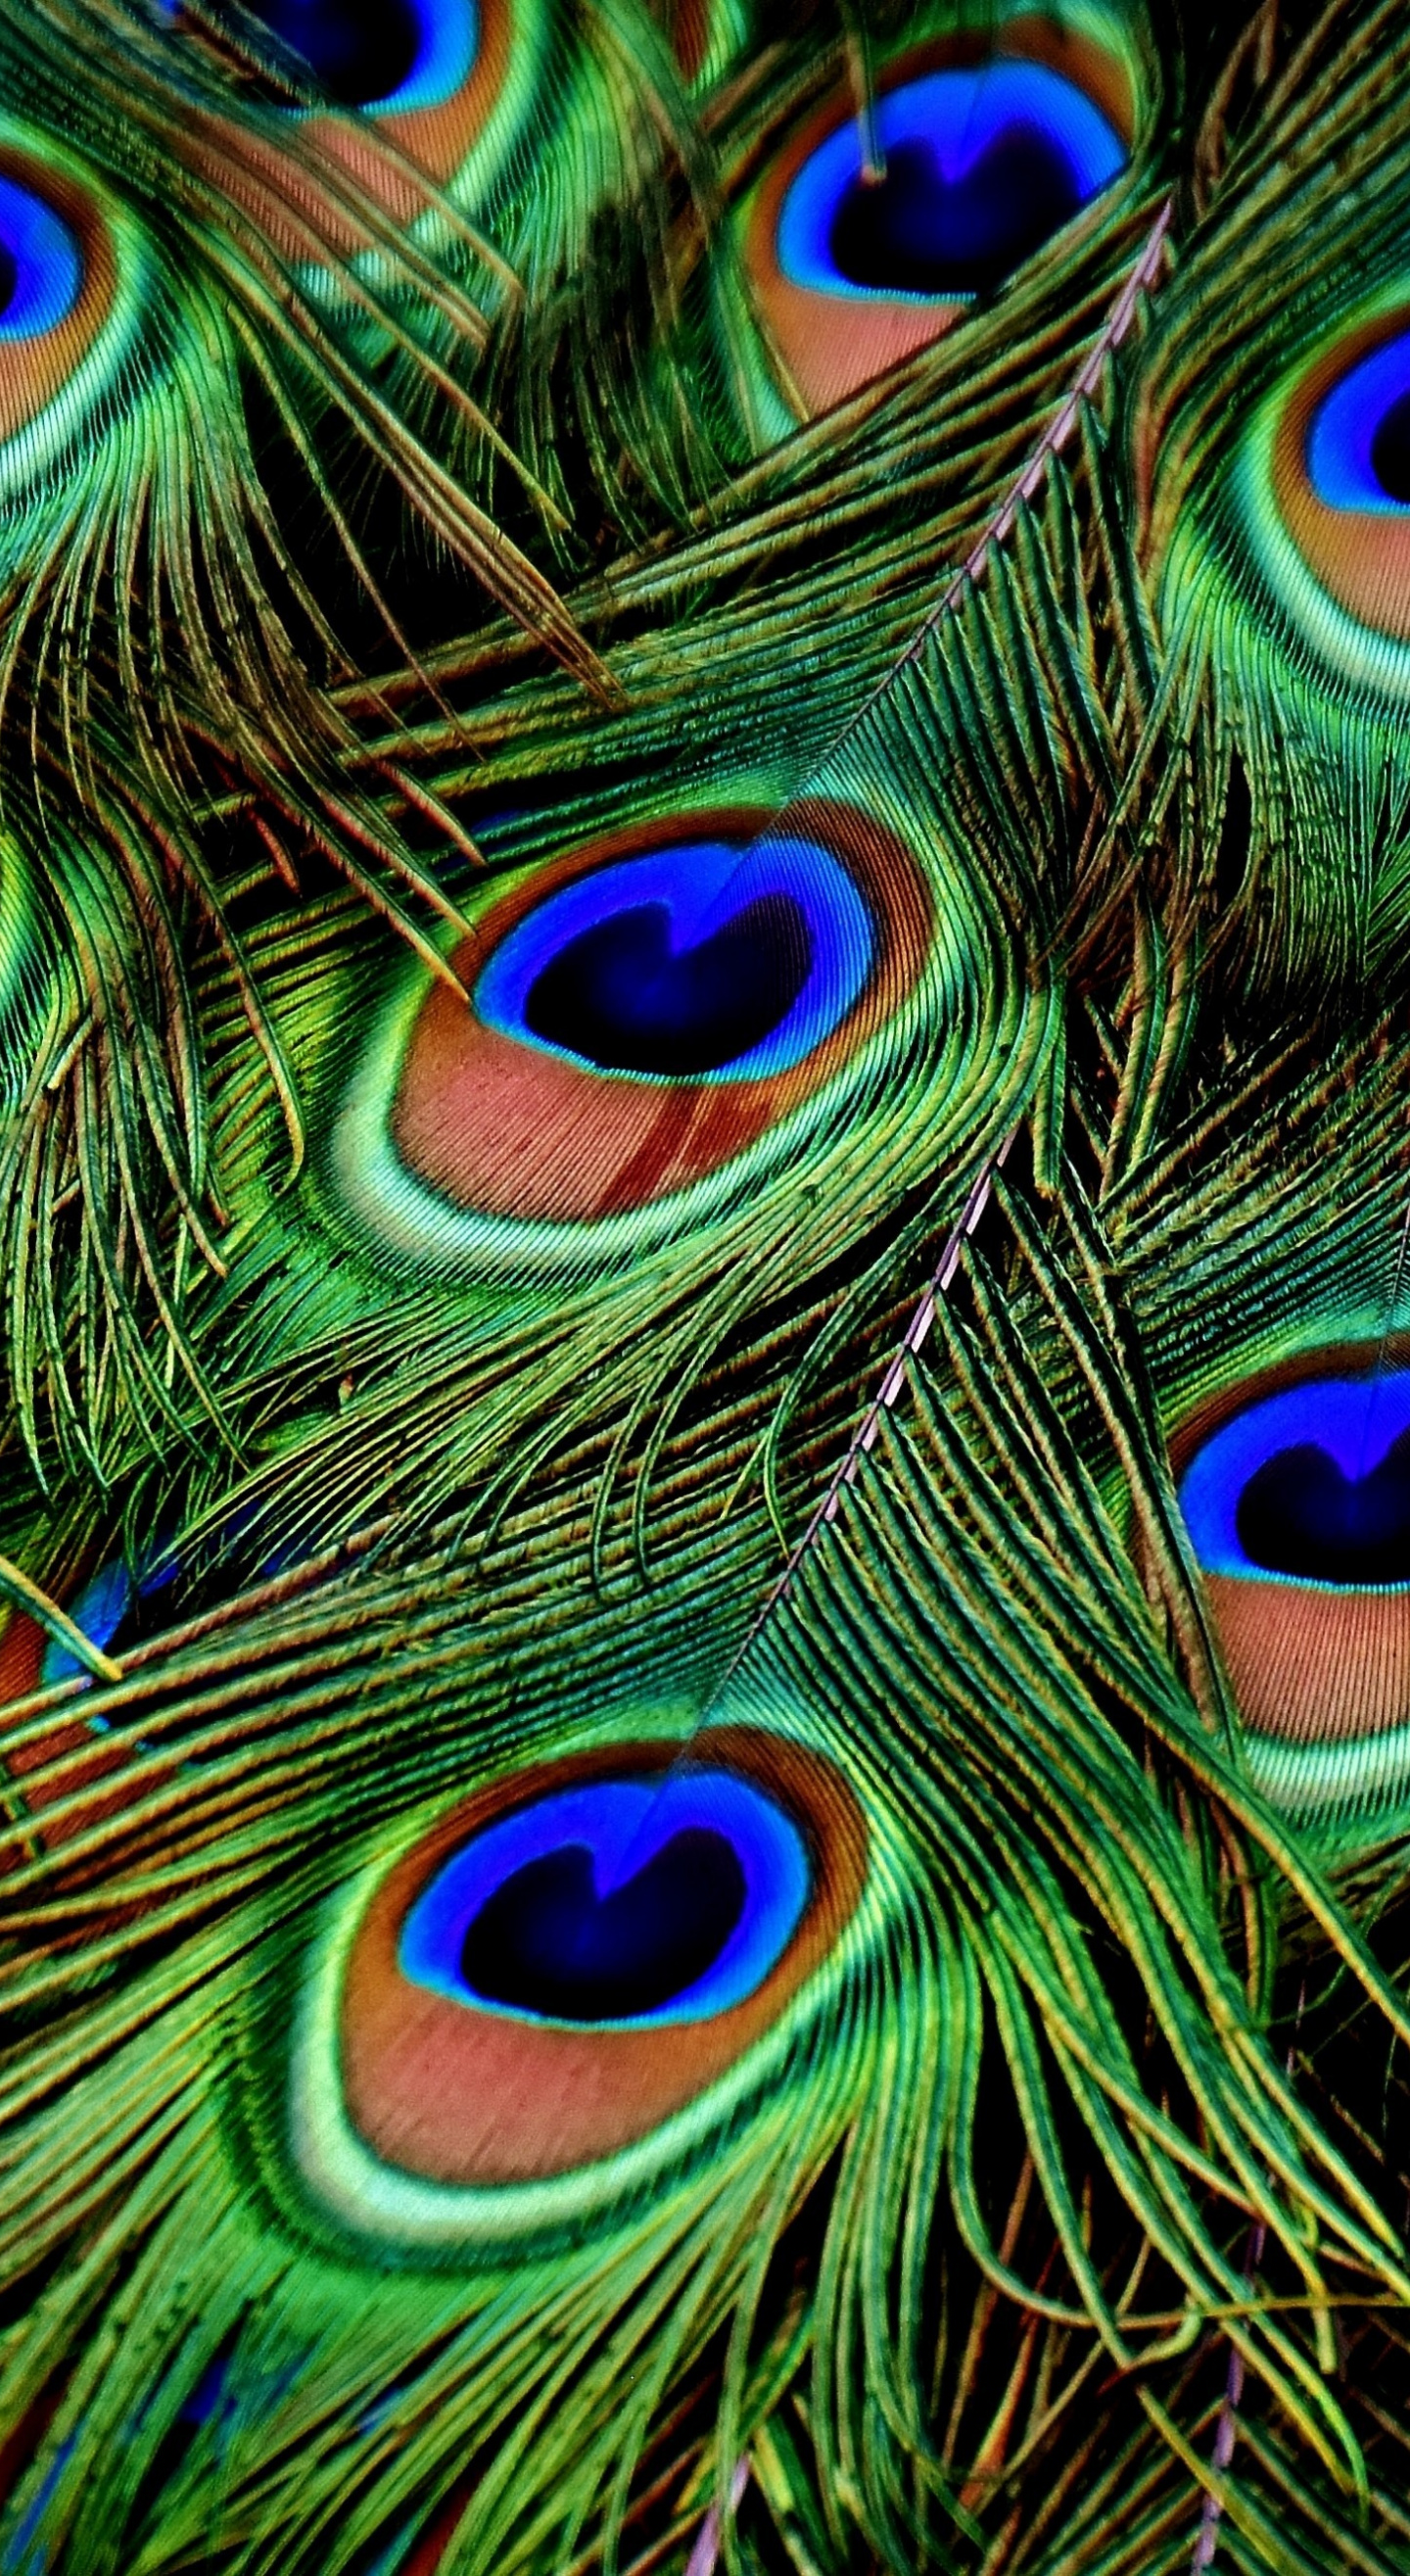 Peacock Feathers Hd Wallpapers - Find the best free stock images about